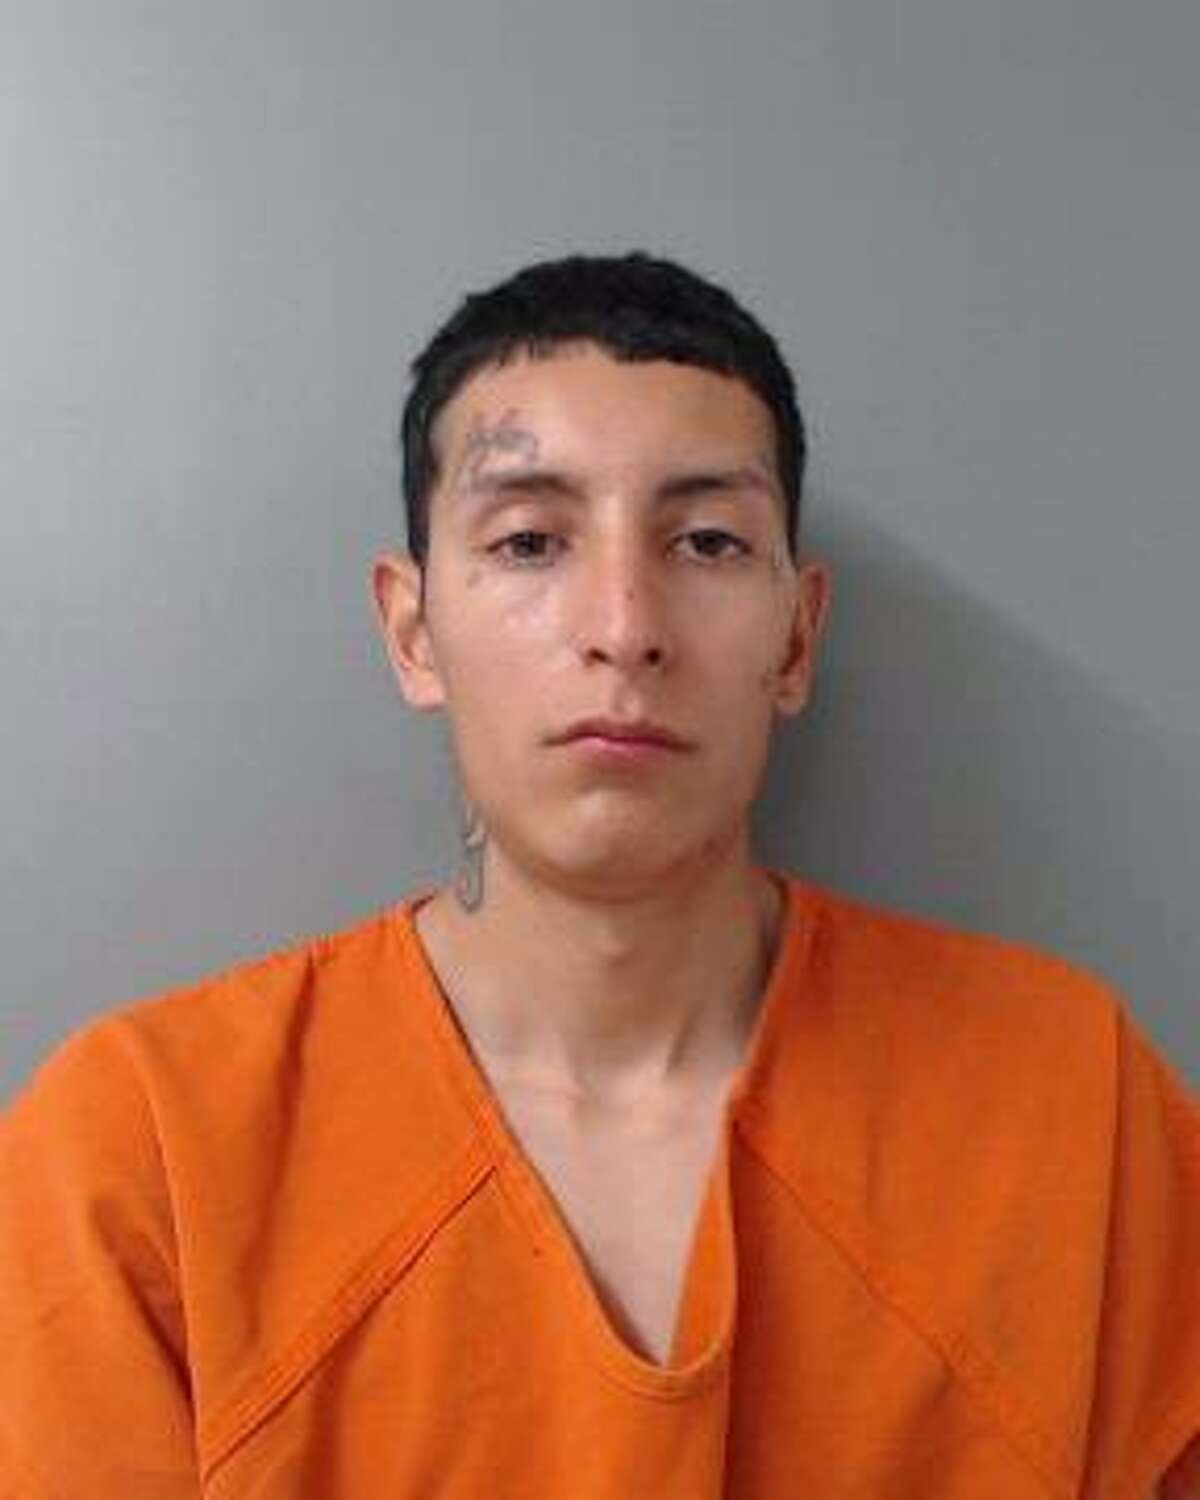 Jose Oscar Infante-Reyes, 25, was charged with aggravated robbery.